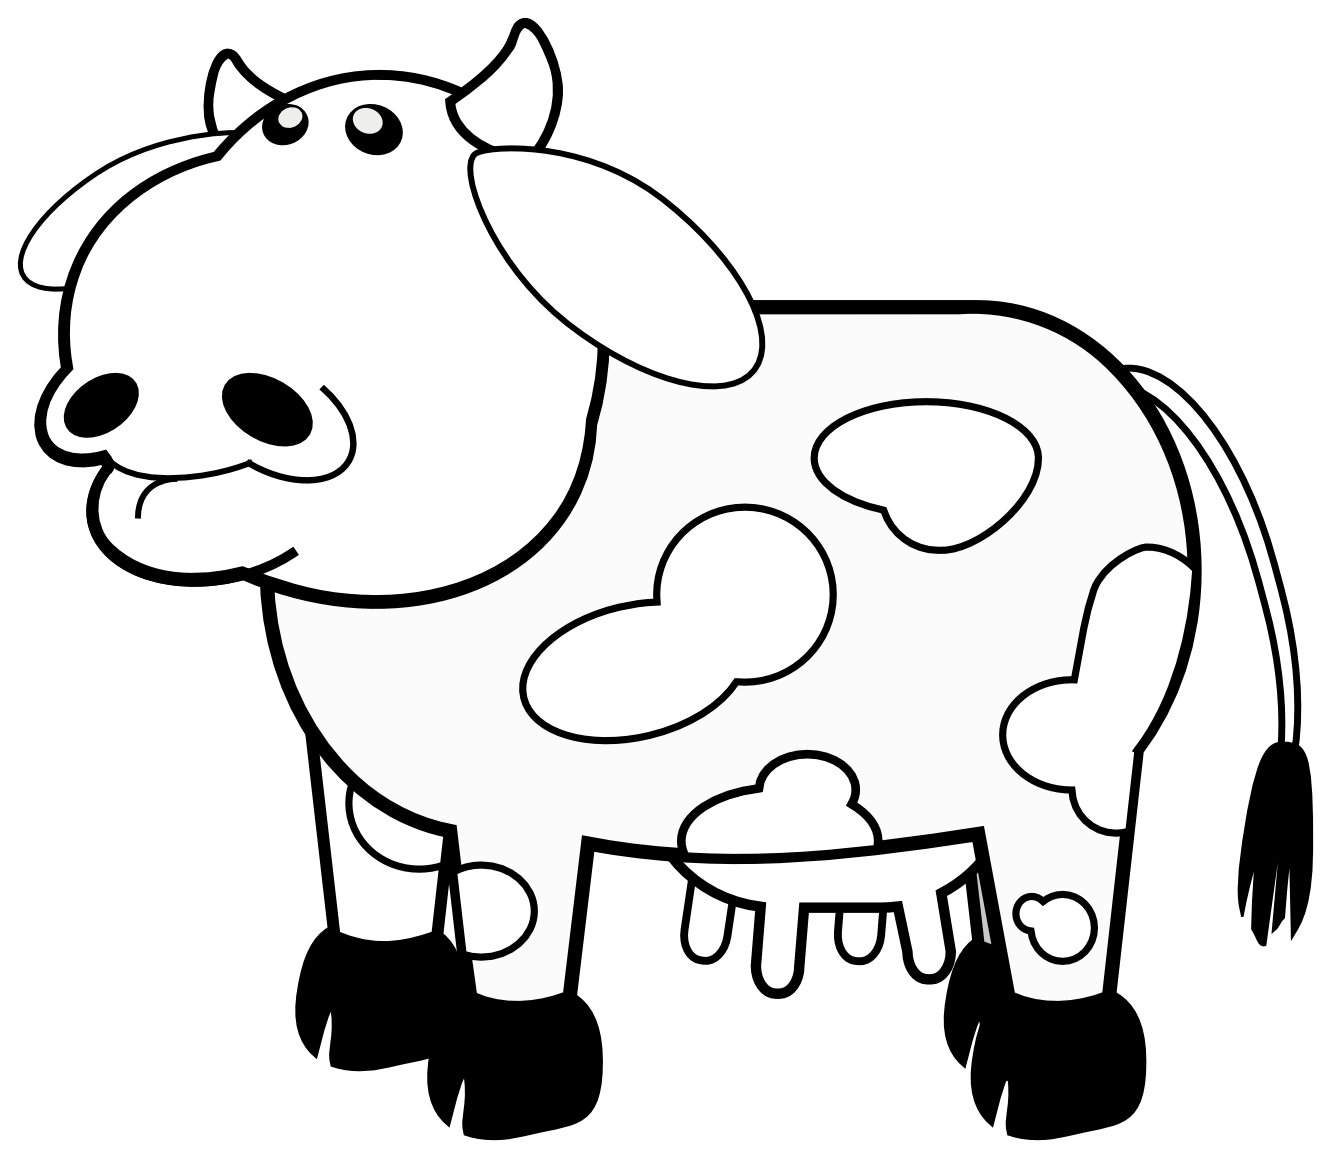 Clipart grass cow. Black and white panda